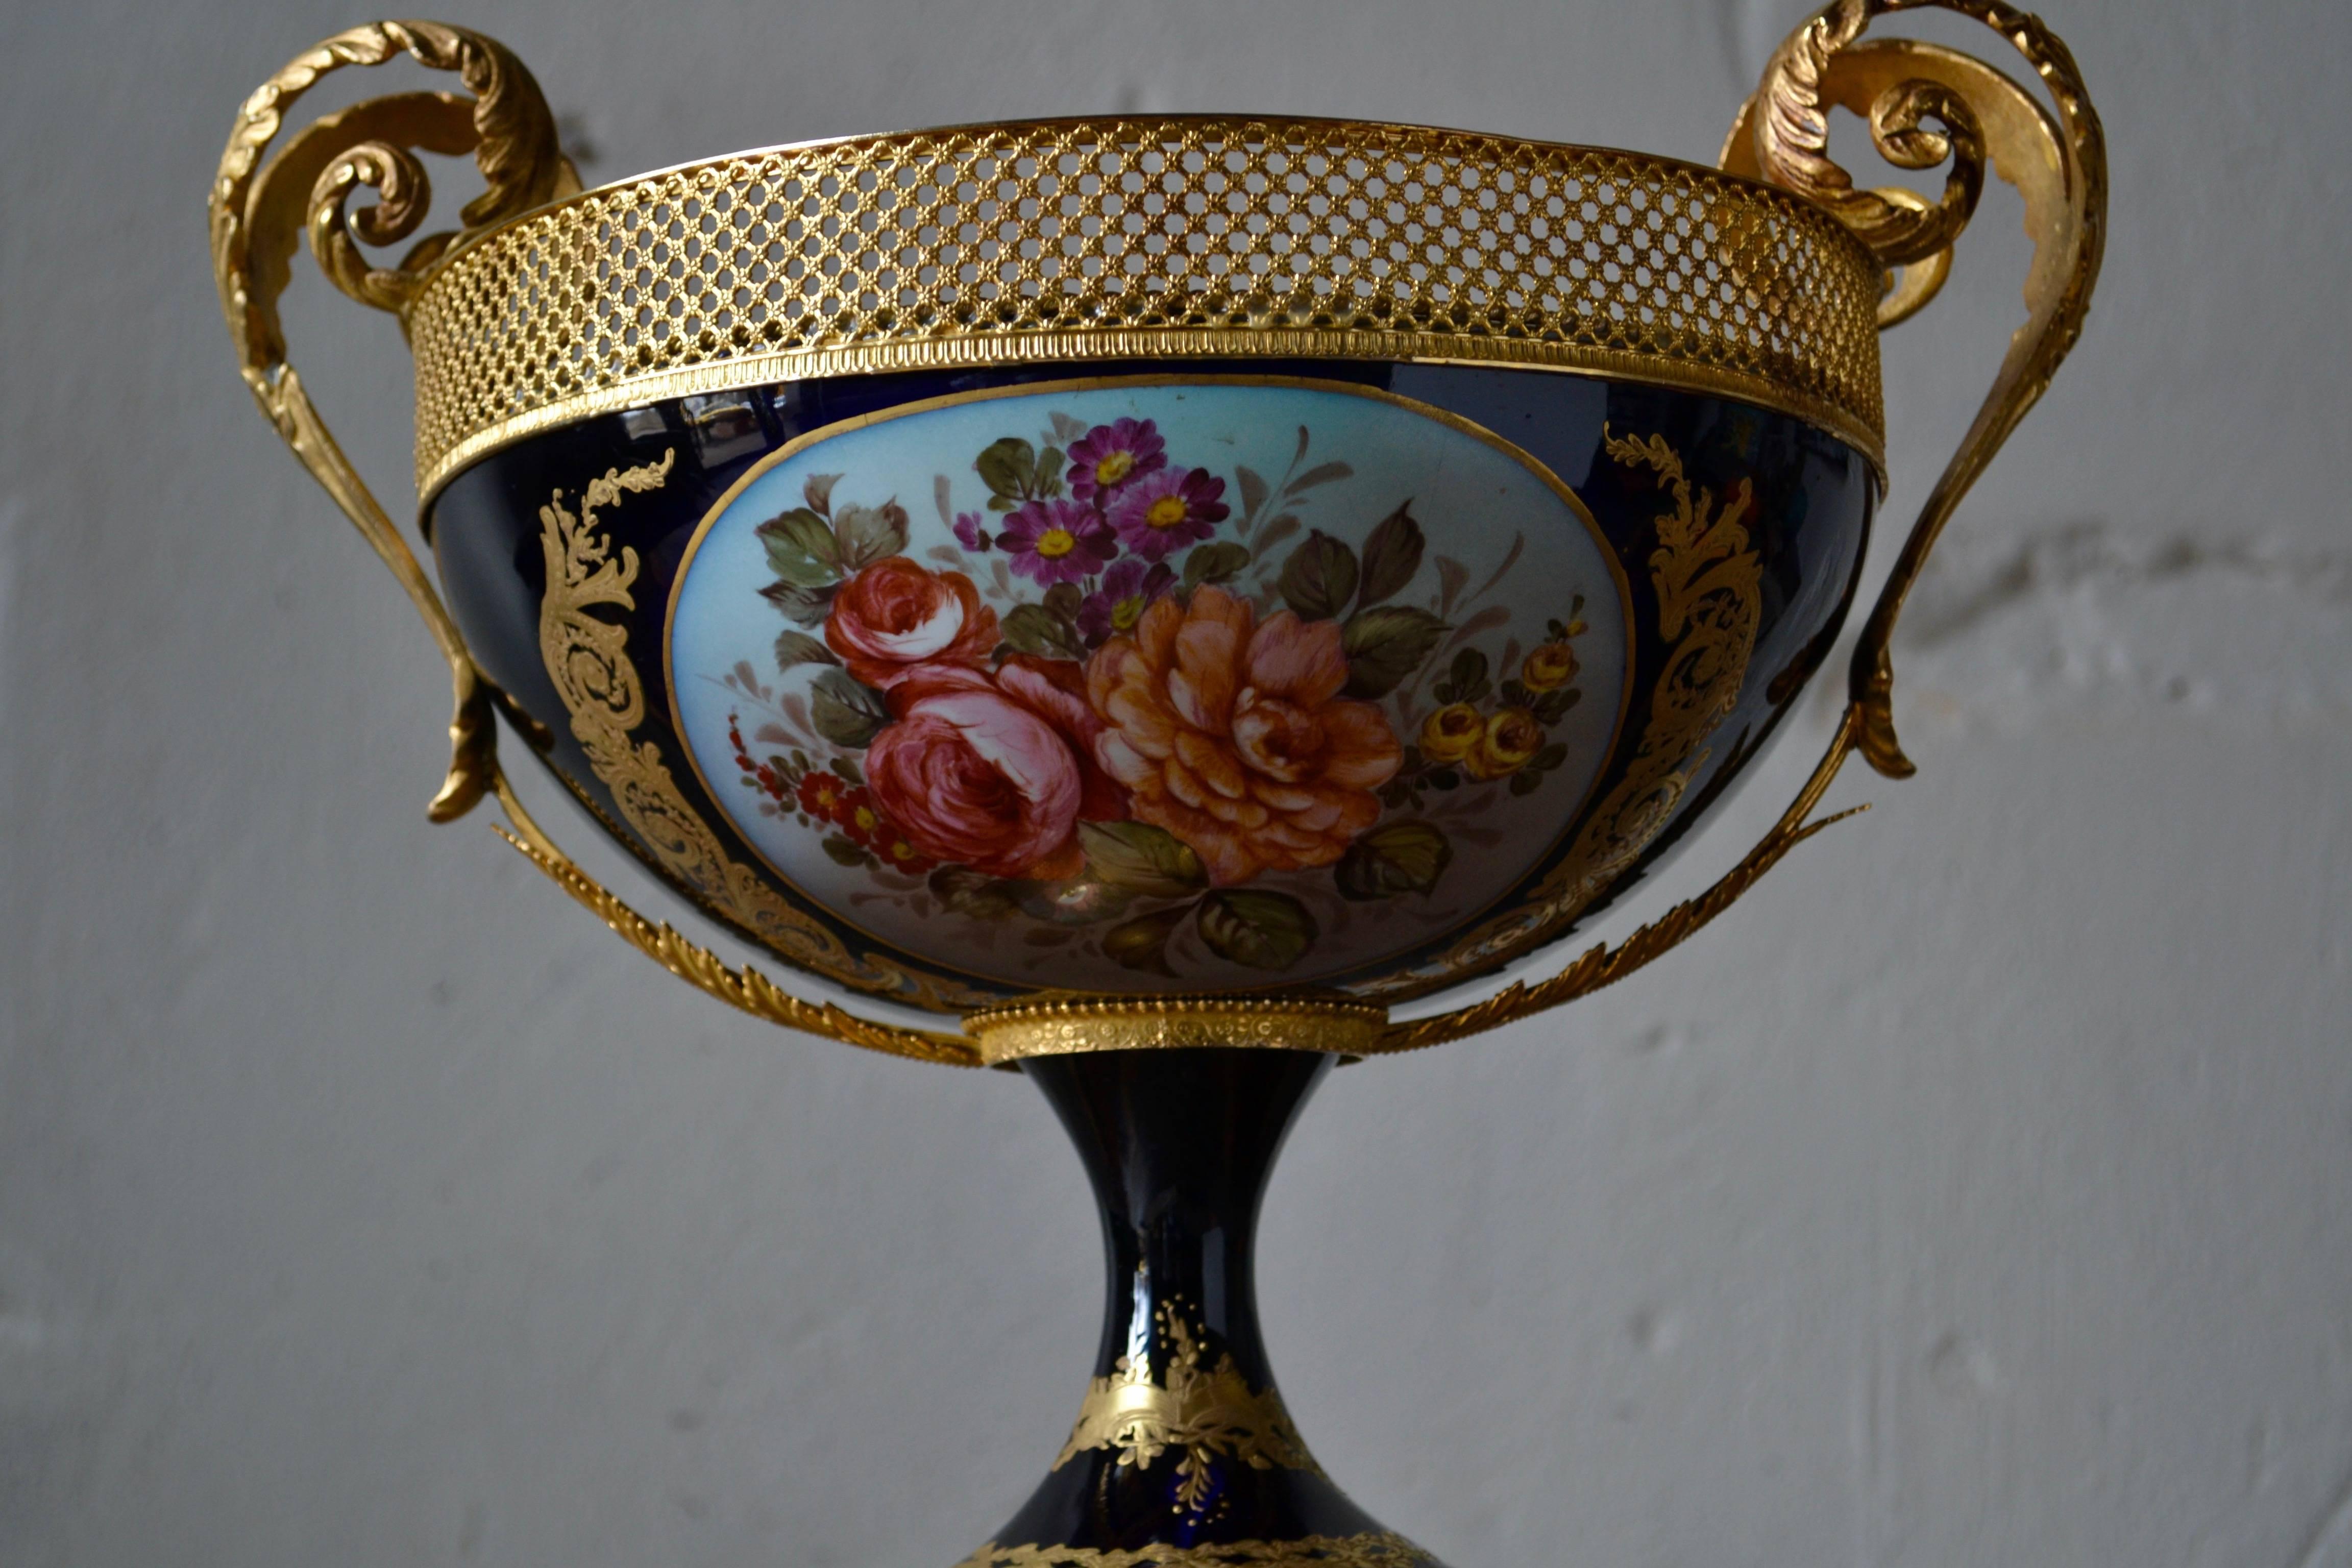 19th Century Sèvres French Hand-Painted Porcelain Jardiniére with Bronze Mounts In Excellent Condition For Sale In Helsingborg, SE